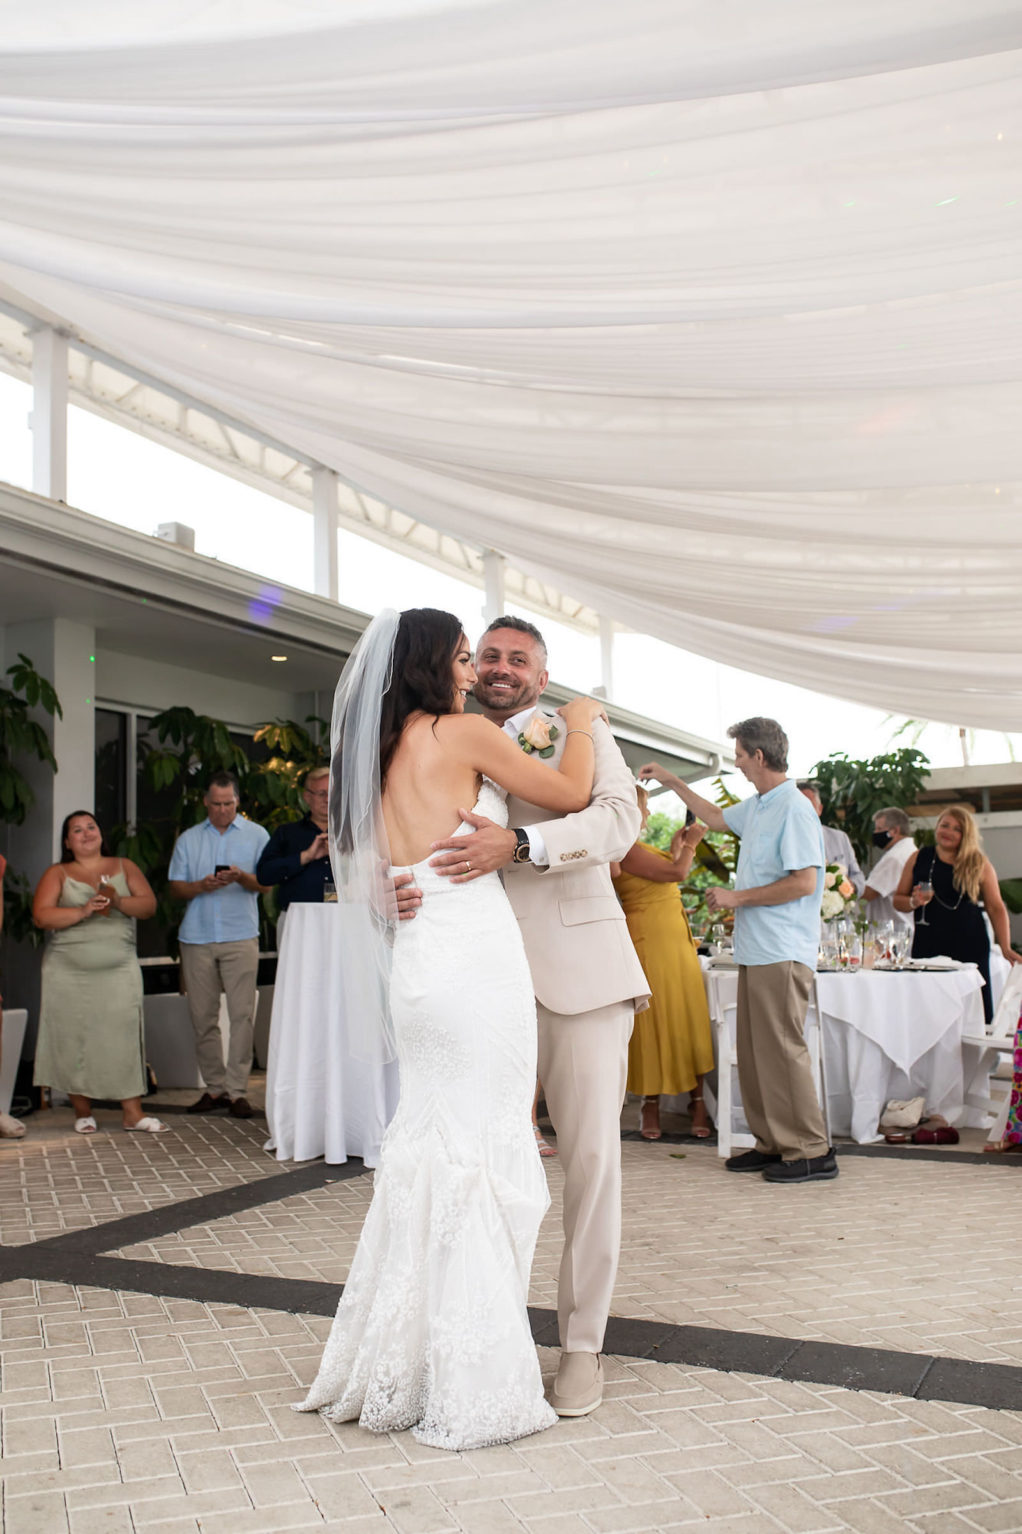 Outdoor Bride and Groom First Dance Portrait at Florida Beach Wedding at Sarasota Wedding Venue The Resort at Longboat Key Club | Bride Wearing Strapless Sheath Wedding Gown by Tara Keilly | Groom Wearing Casual Khaki Suit